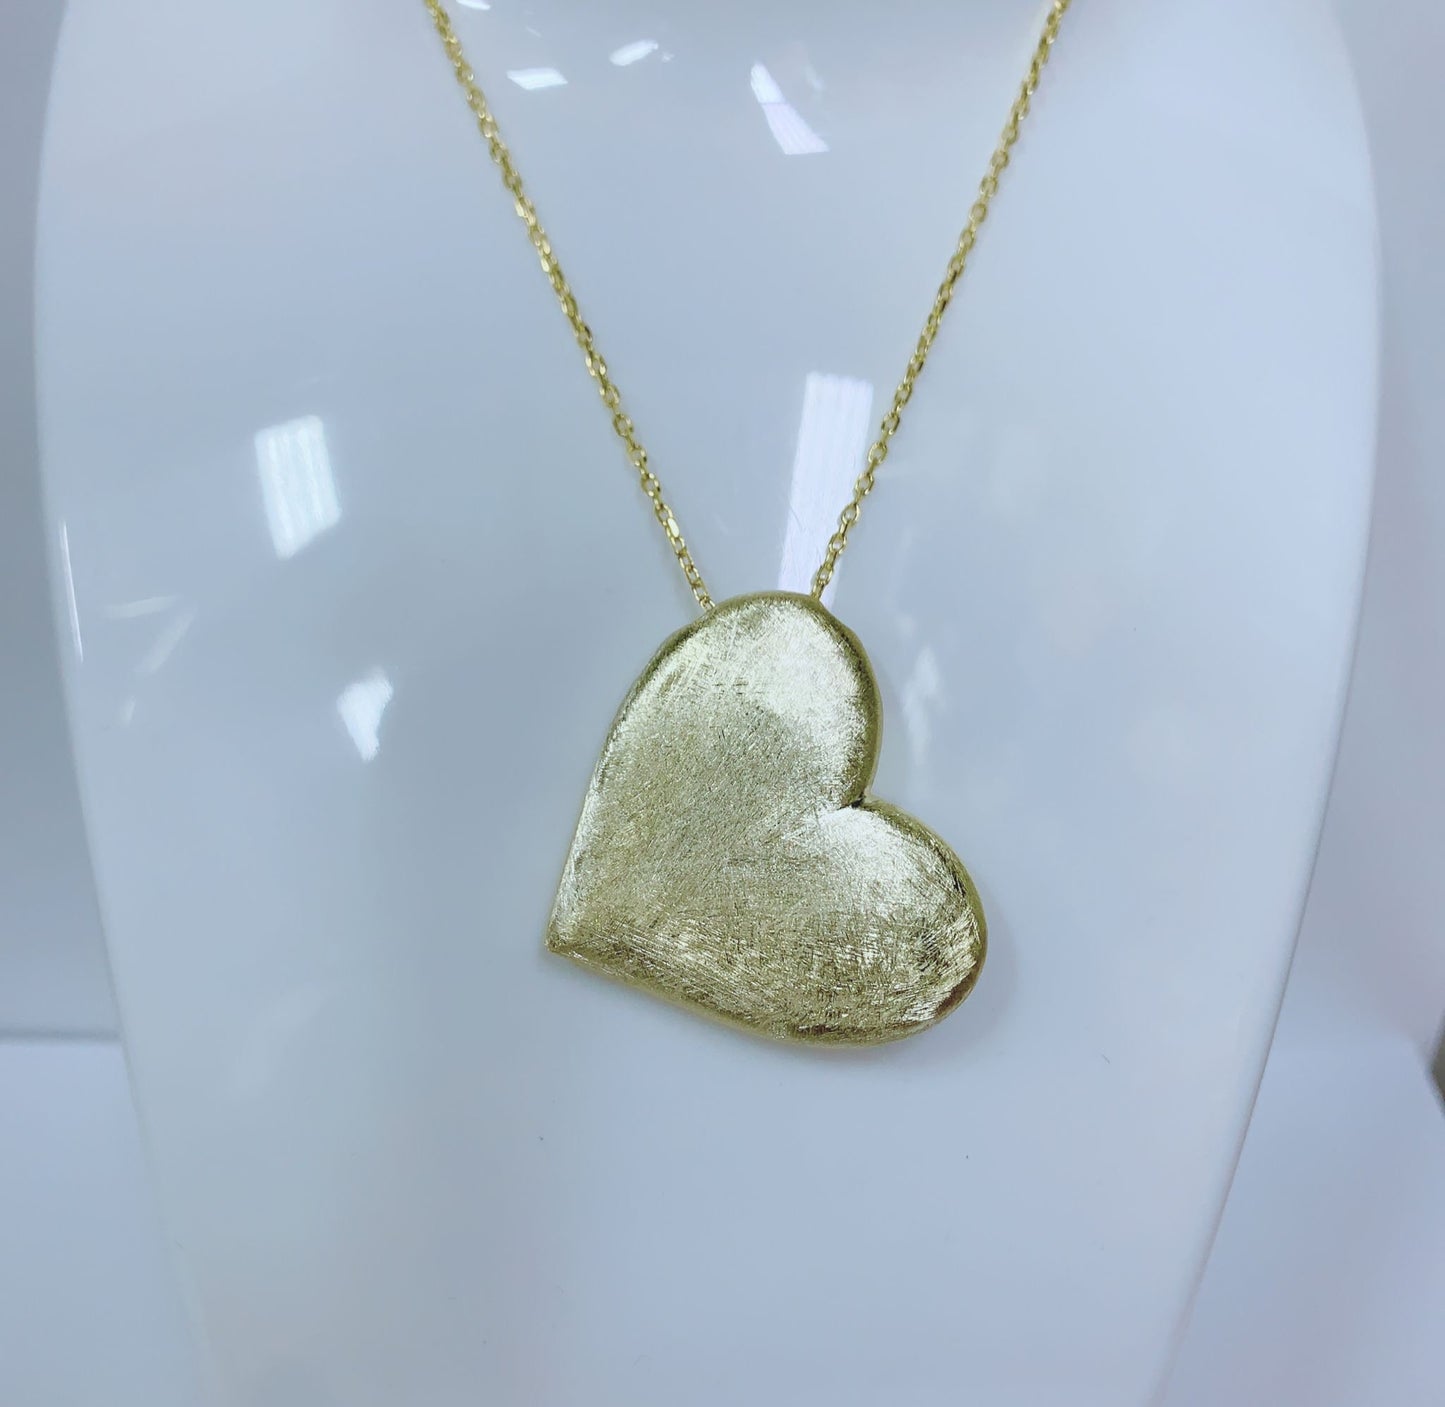 New Big heart necklace limited edition